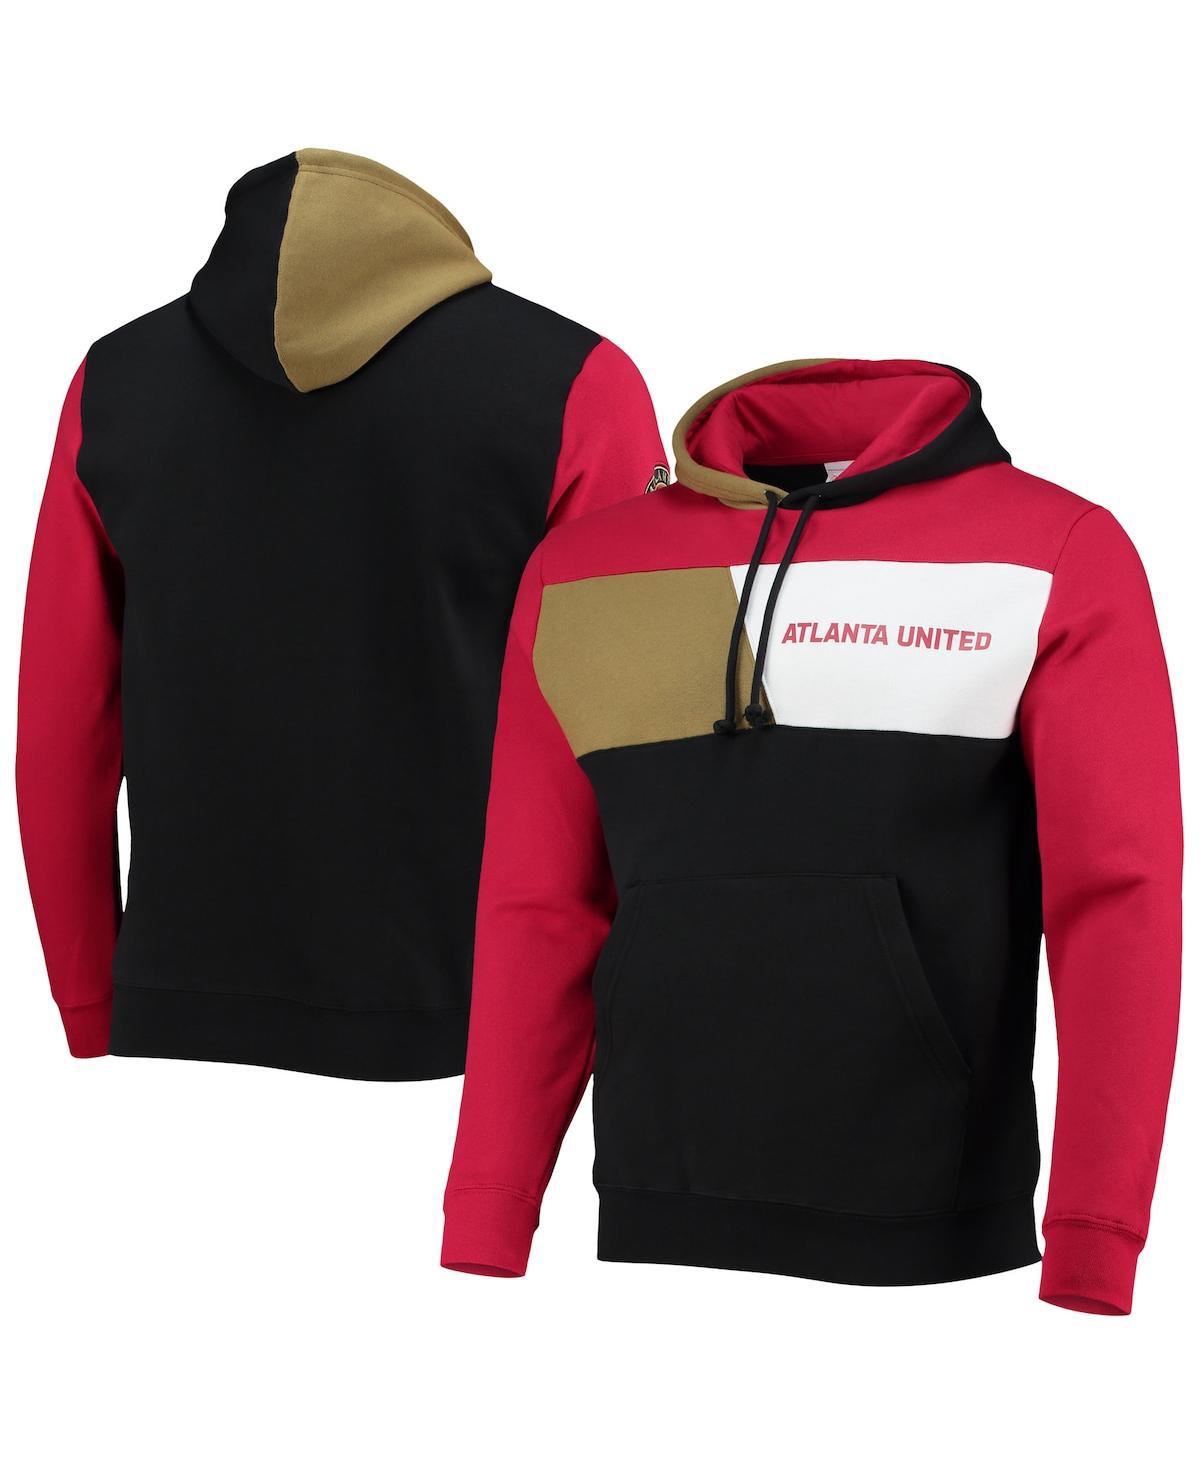 MITCHELL & NESS MEN'S MITCHELL & NESS BLACK AND RED ATLANTA UNITED FC COLORBLOCK FLEECE PULLOVER HOODIE